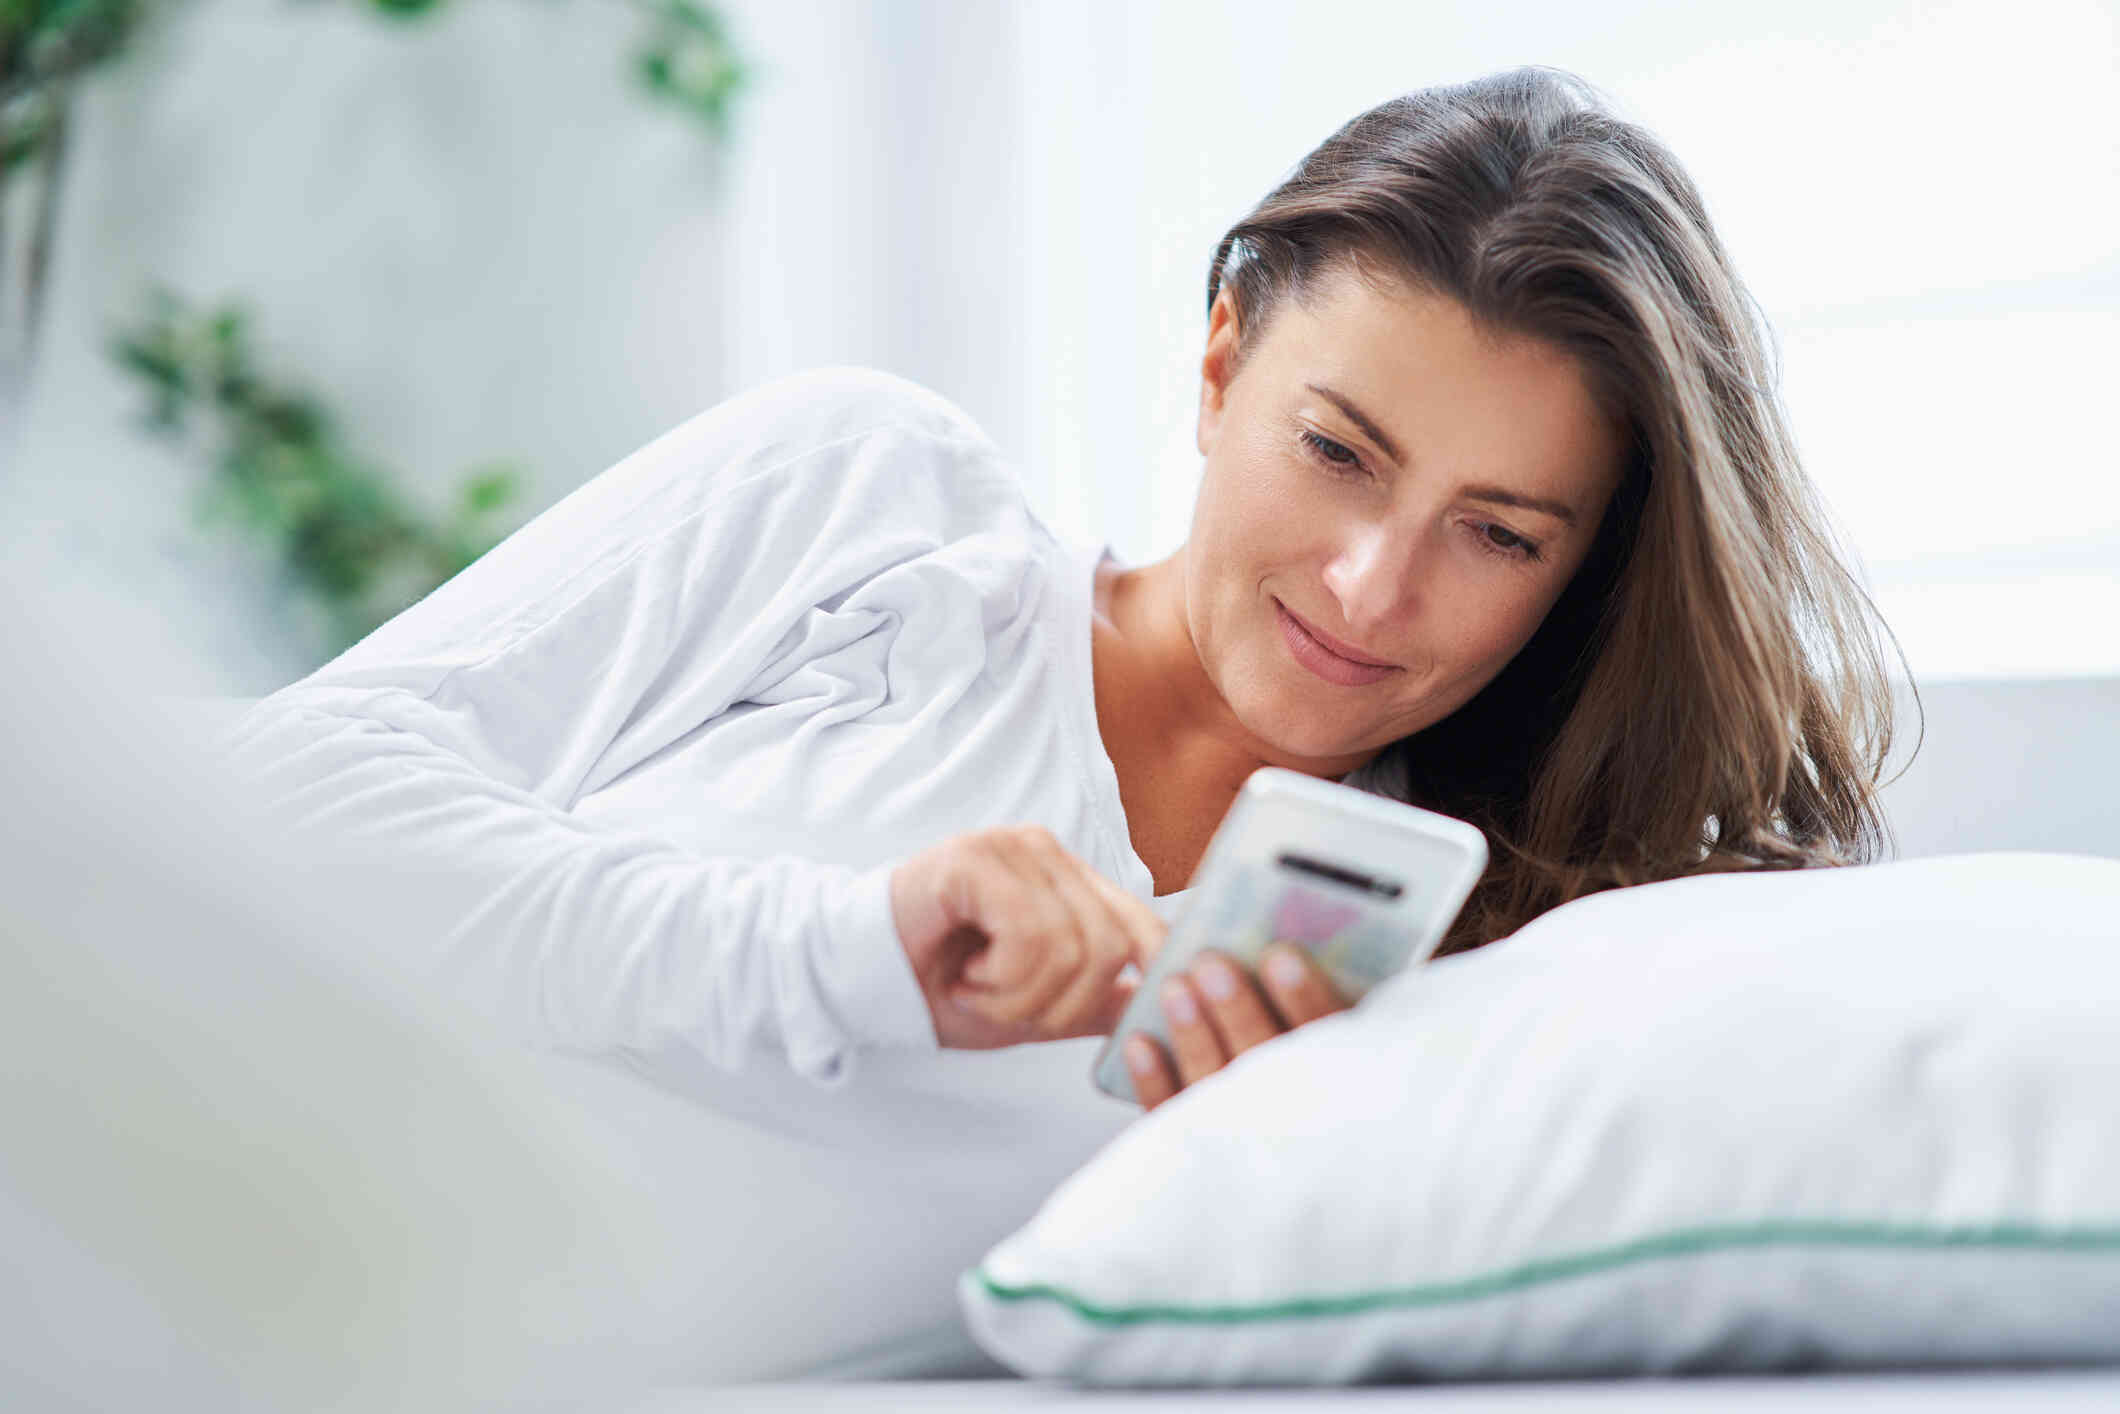 A woman in a white shirt reclines in bed and loks at the cellphone in her hand.